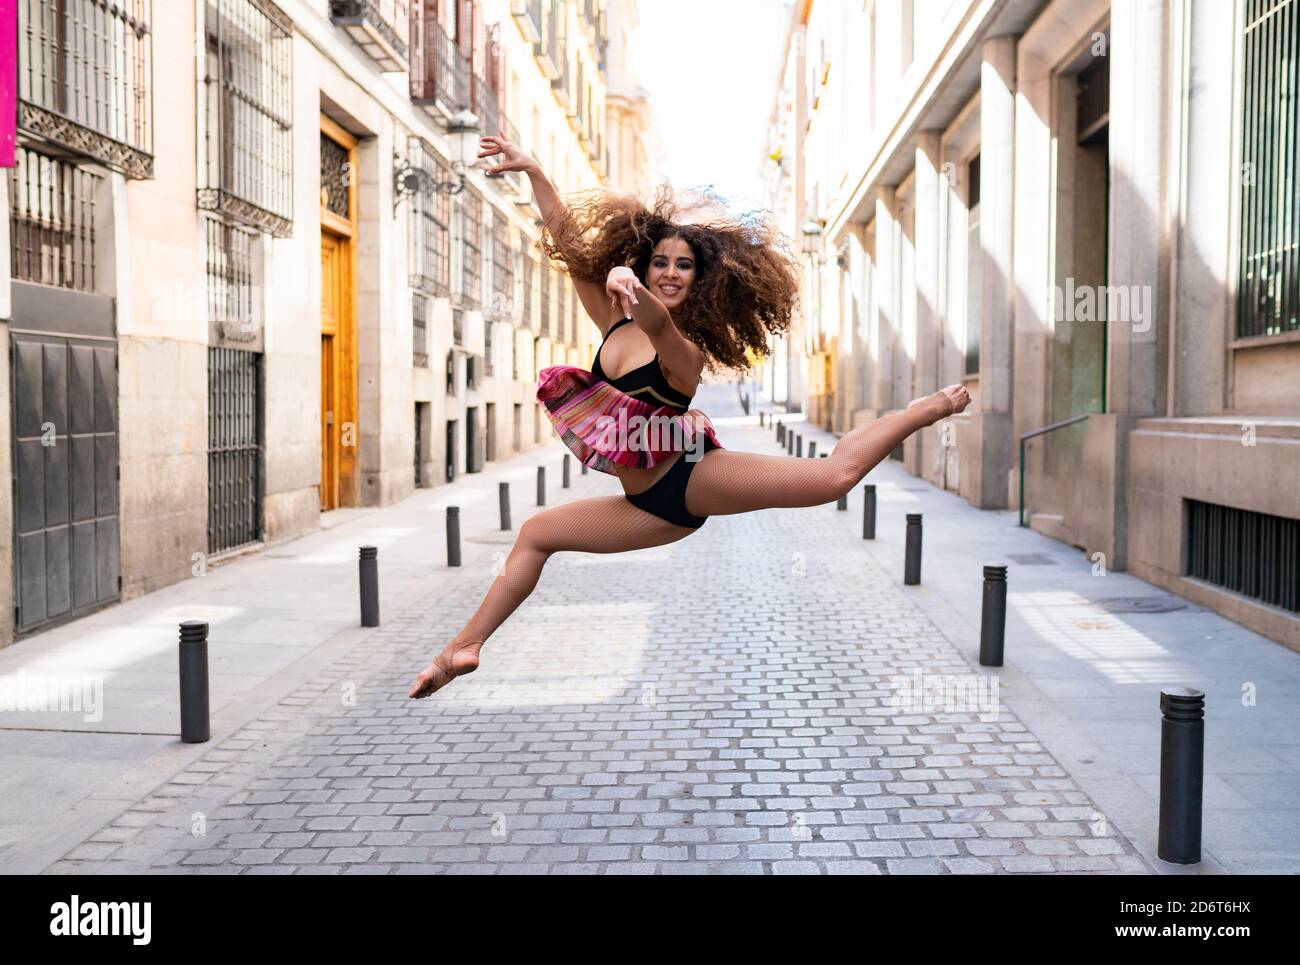 Full body of young fit ethnic female dancer with long curly hair doing grand jete position and smiling on paved street looking at camera Stock Photo